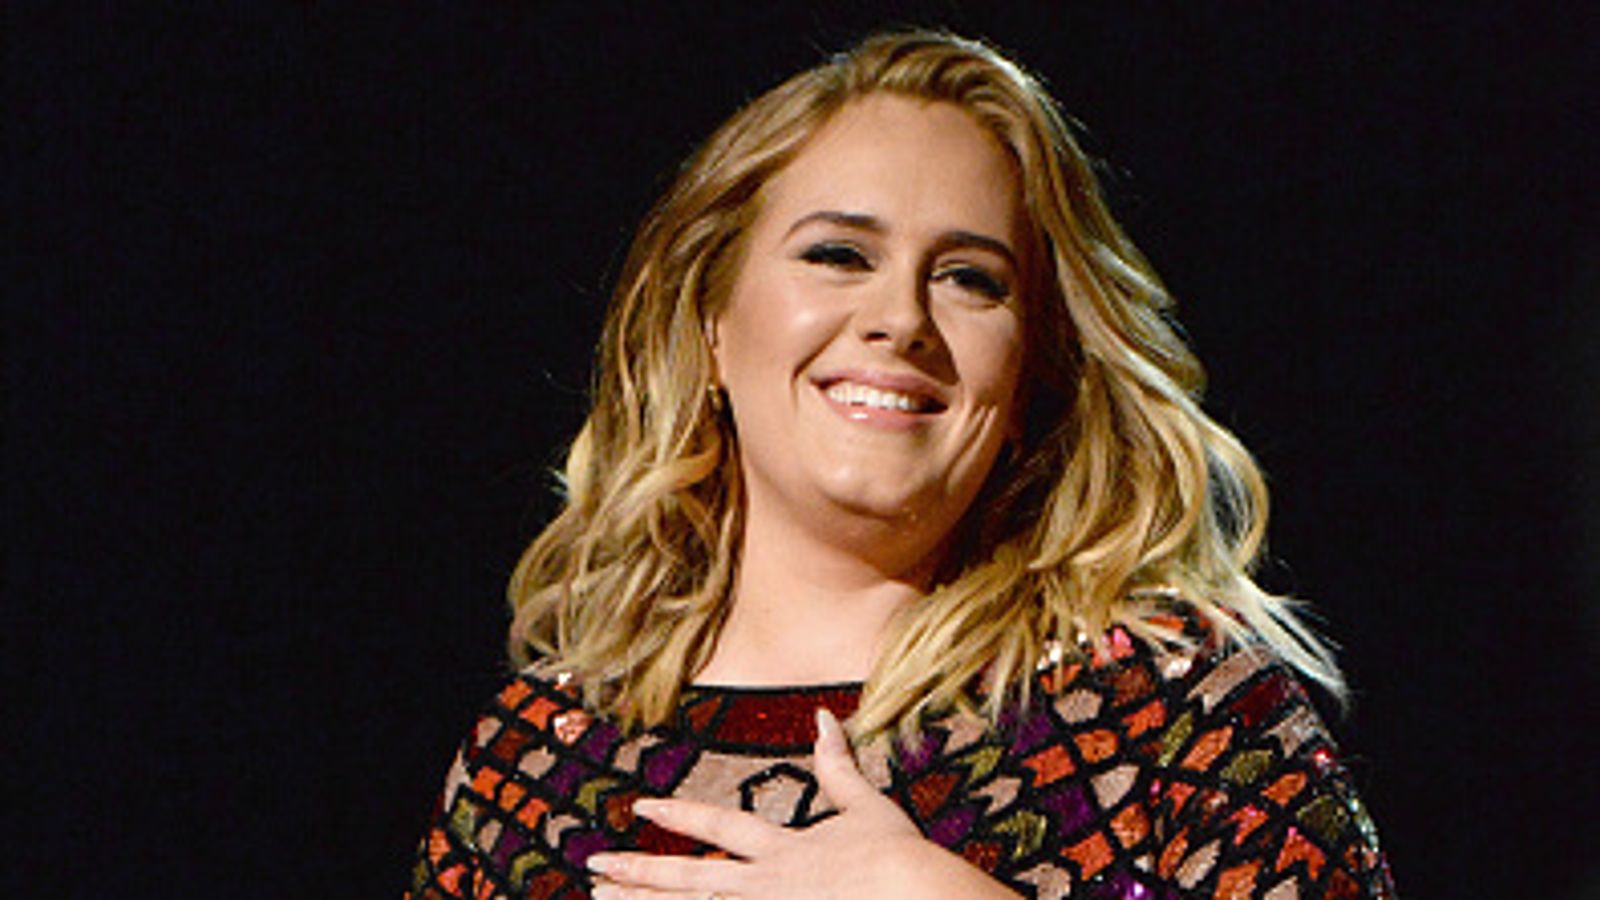 Adele to host Saturday Night Live for first time on Oct. 24